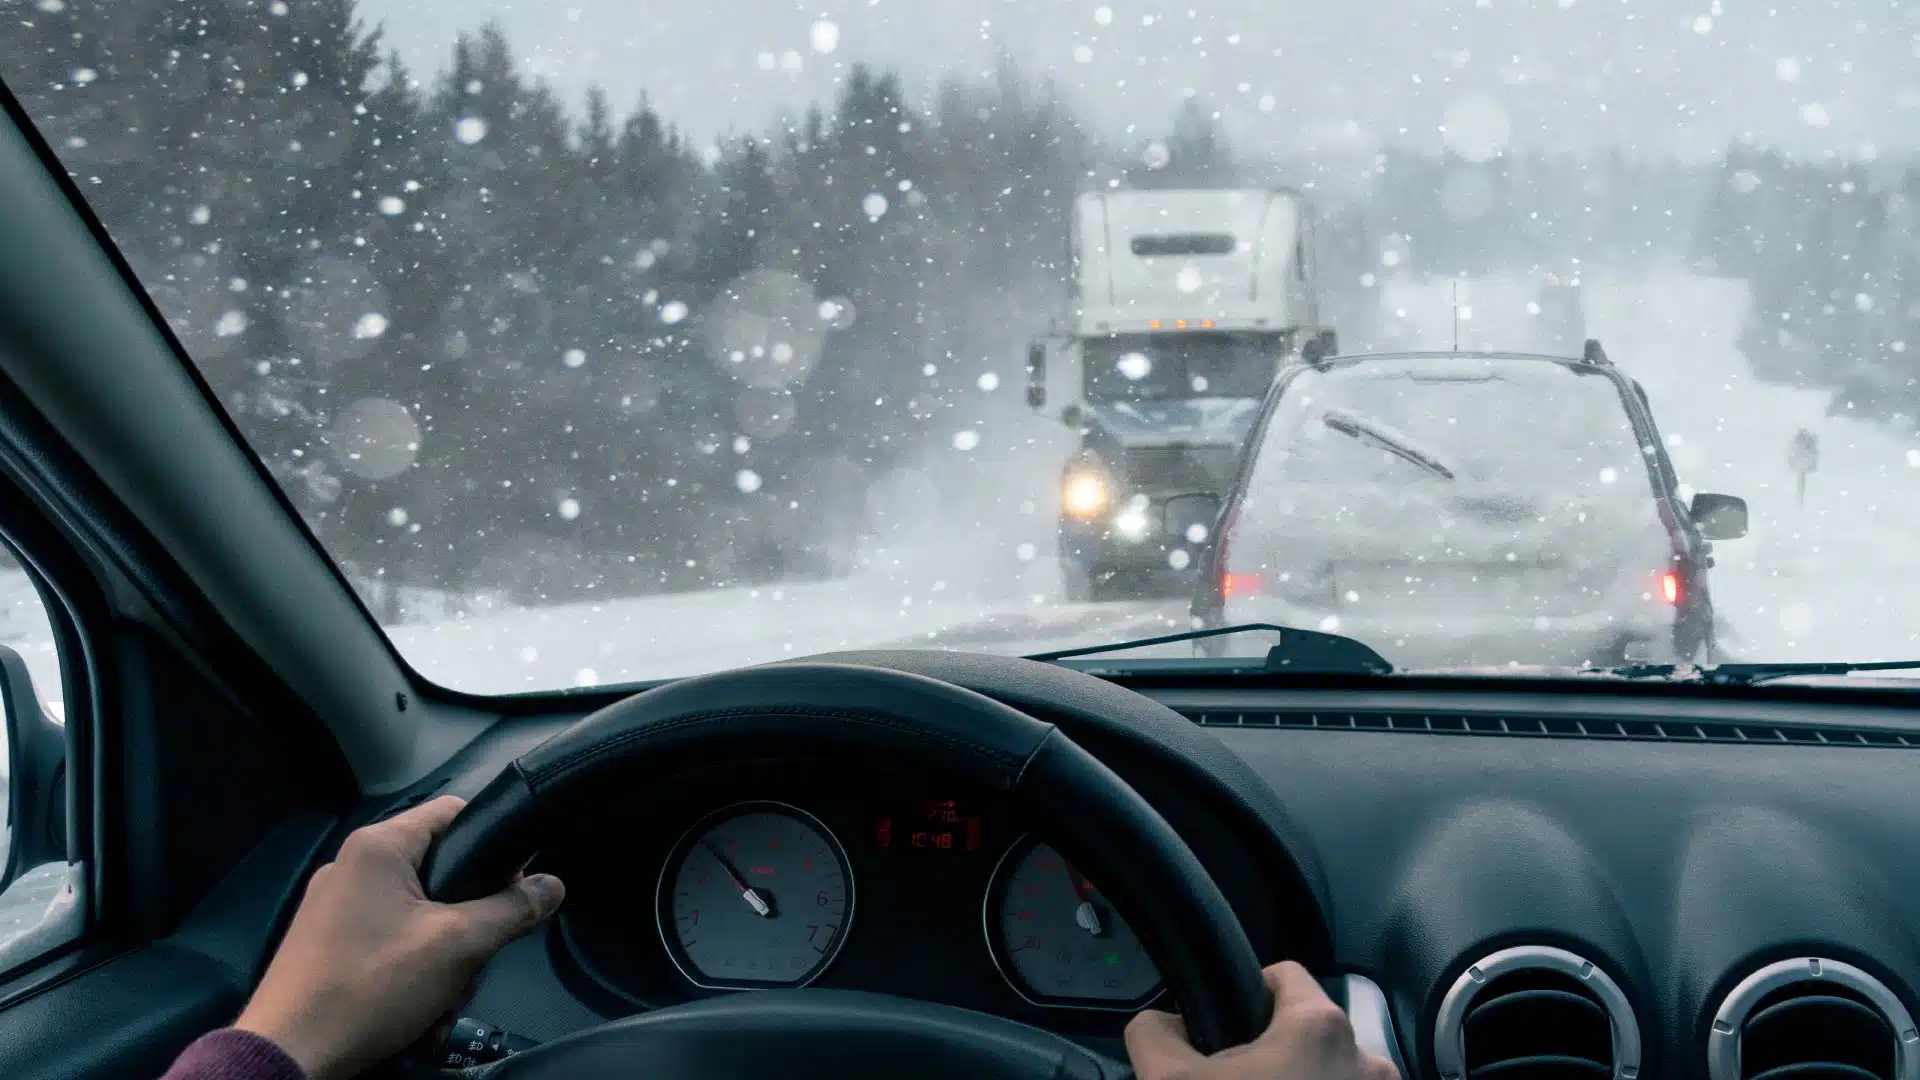 Five Simple Things You Can Do to Get Ready for Winter Driving